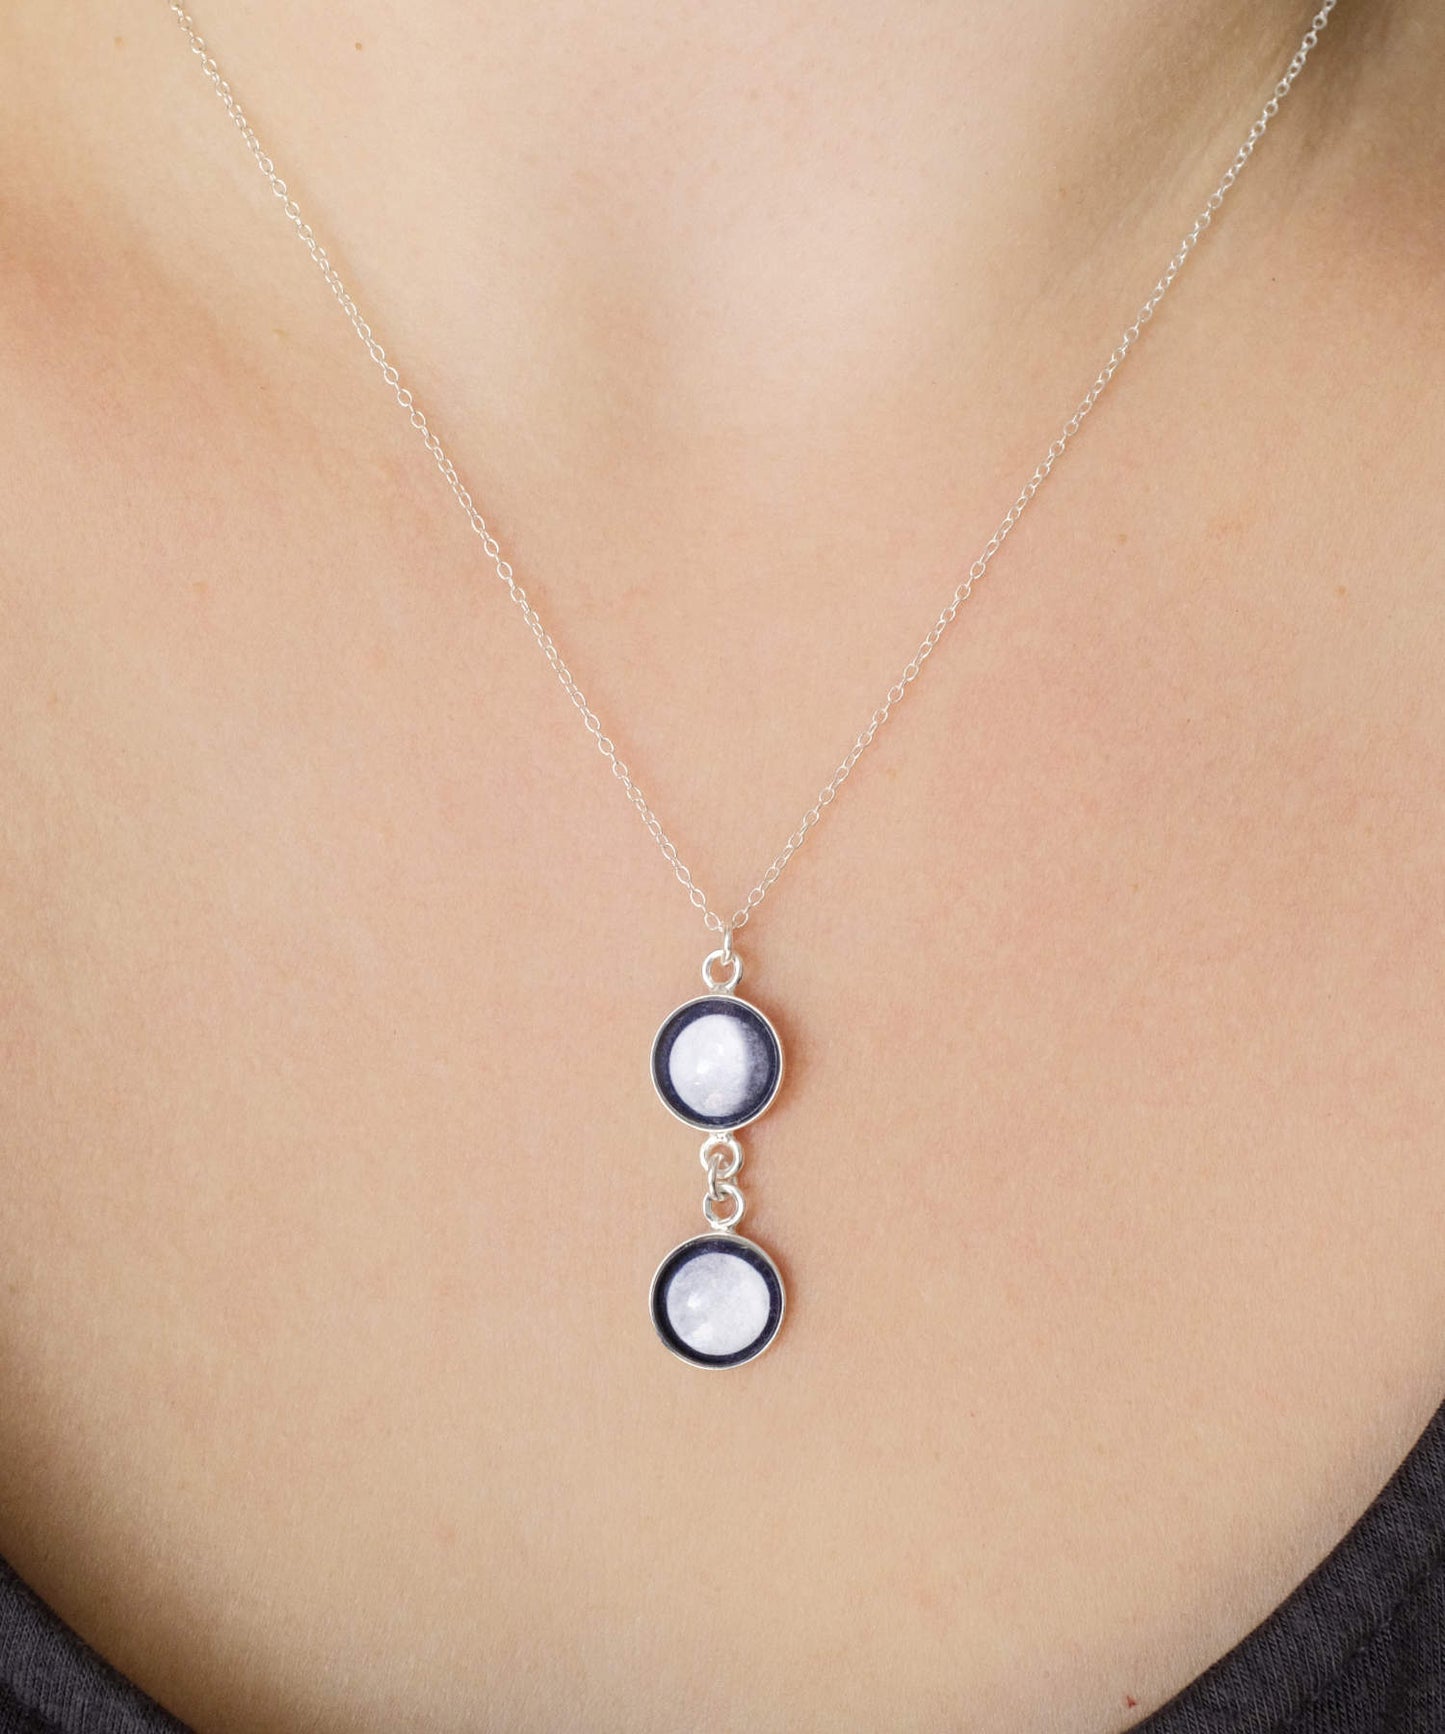 Personalised Double Moon Phase Necklace